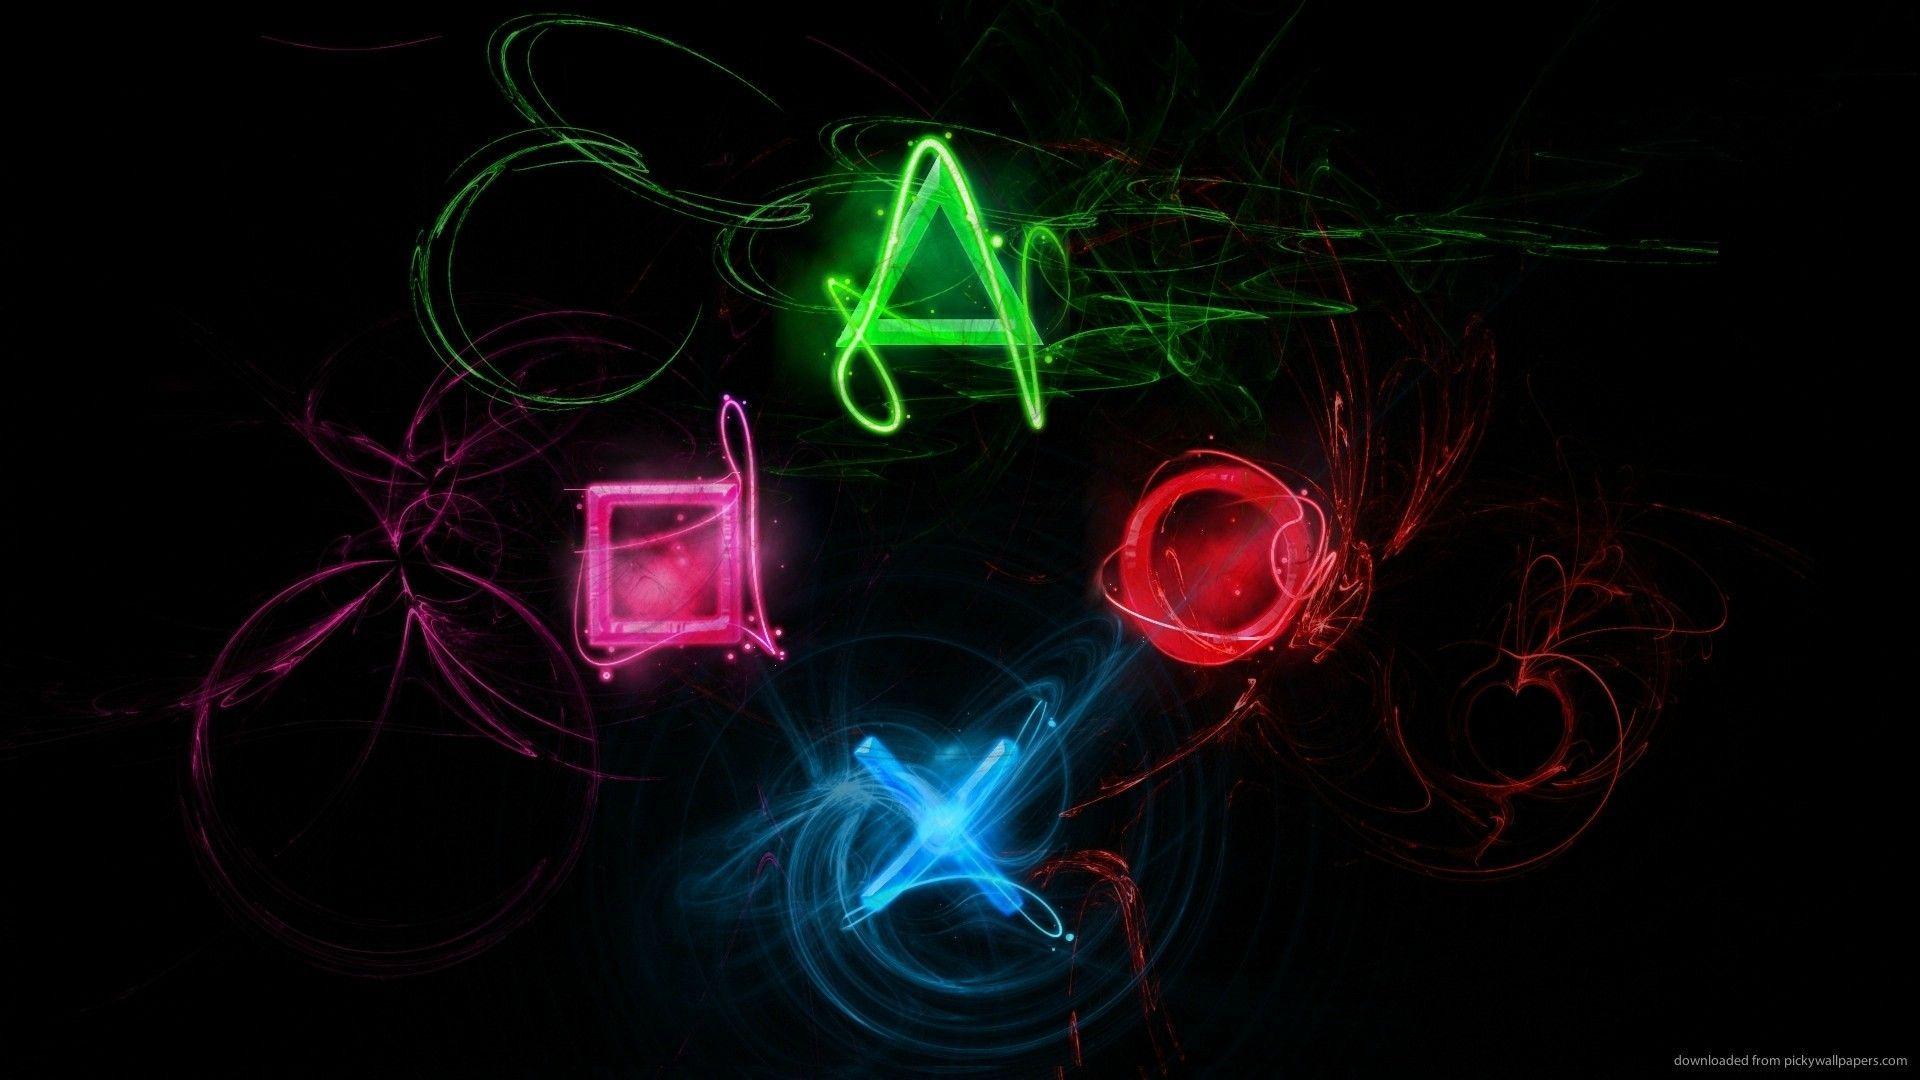 Playstation Controller Wallpapers Top Free Playstation Images, Photos, Reviews